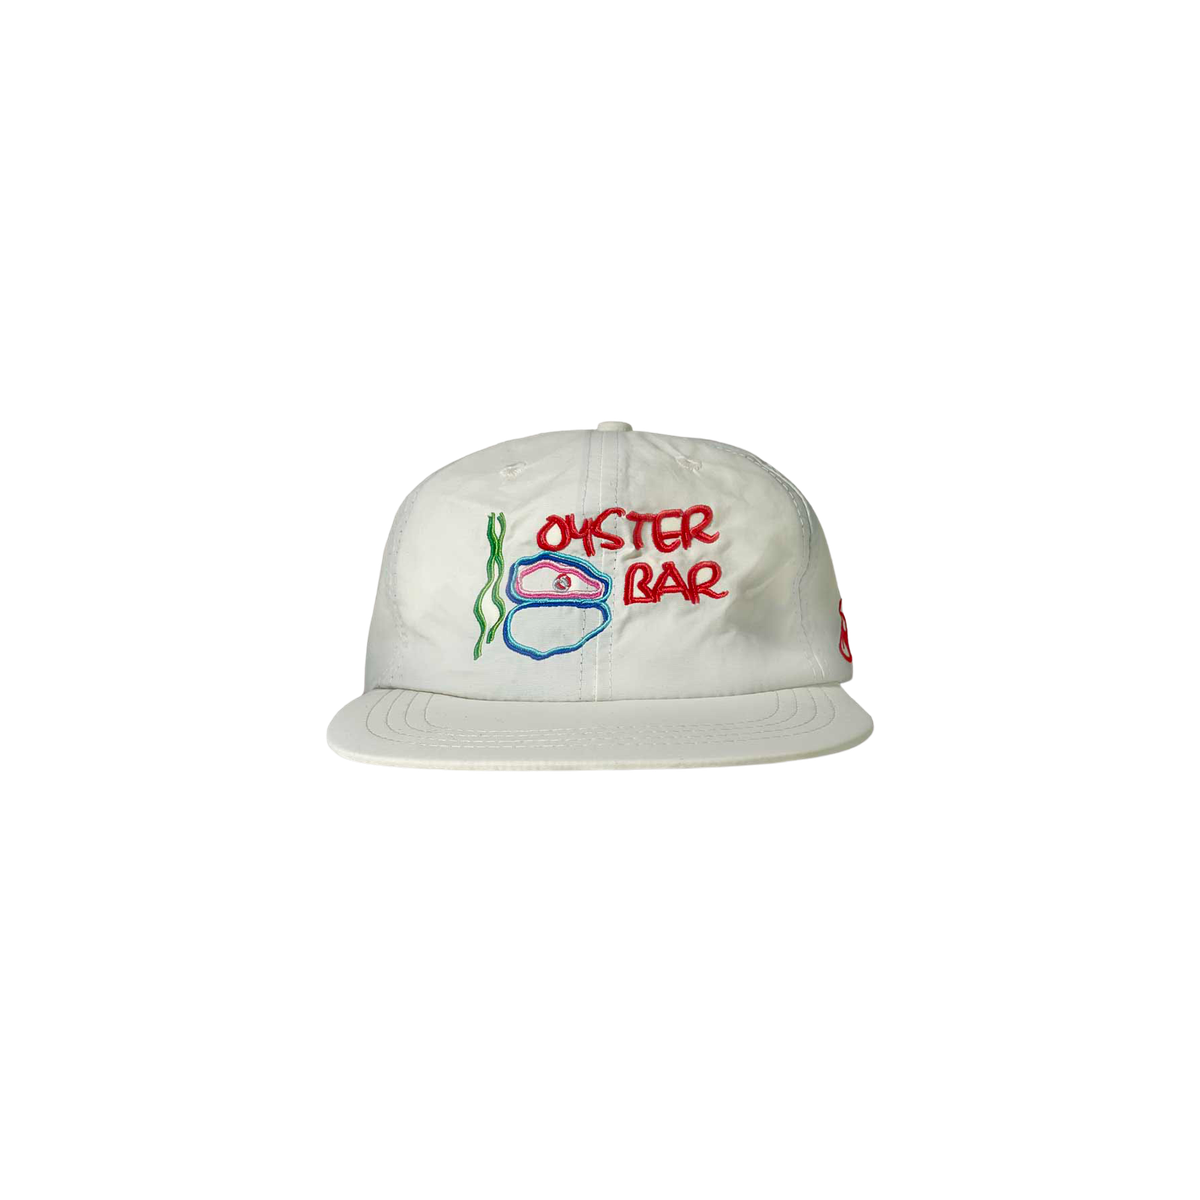 Neon Sign Oyster Bar Hat